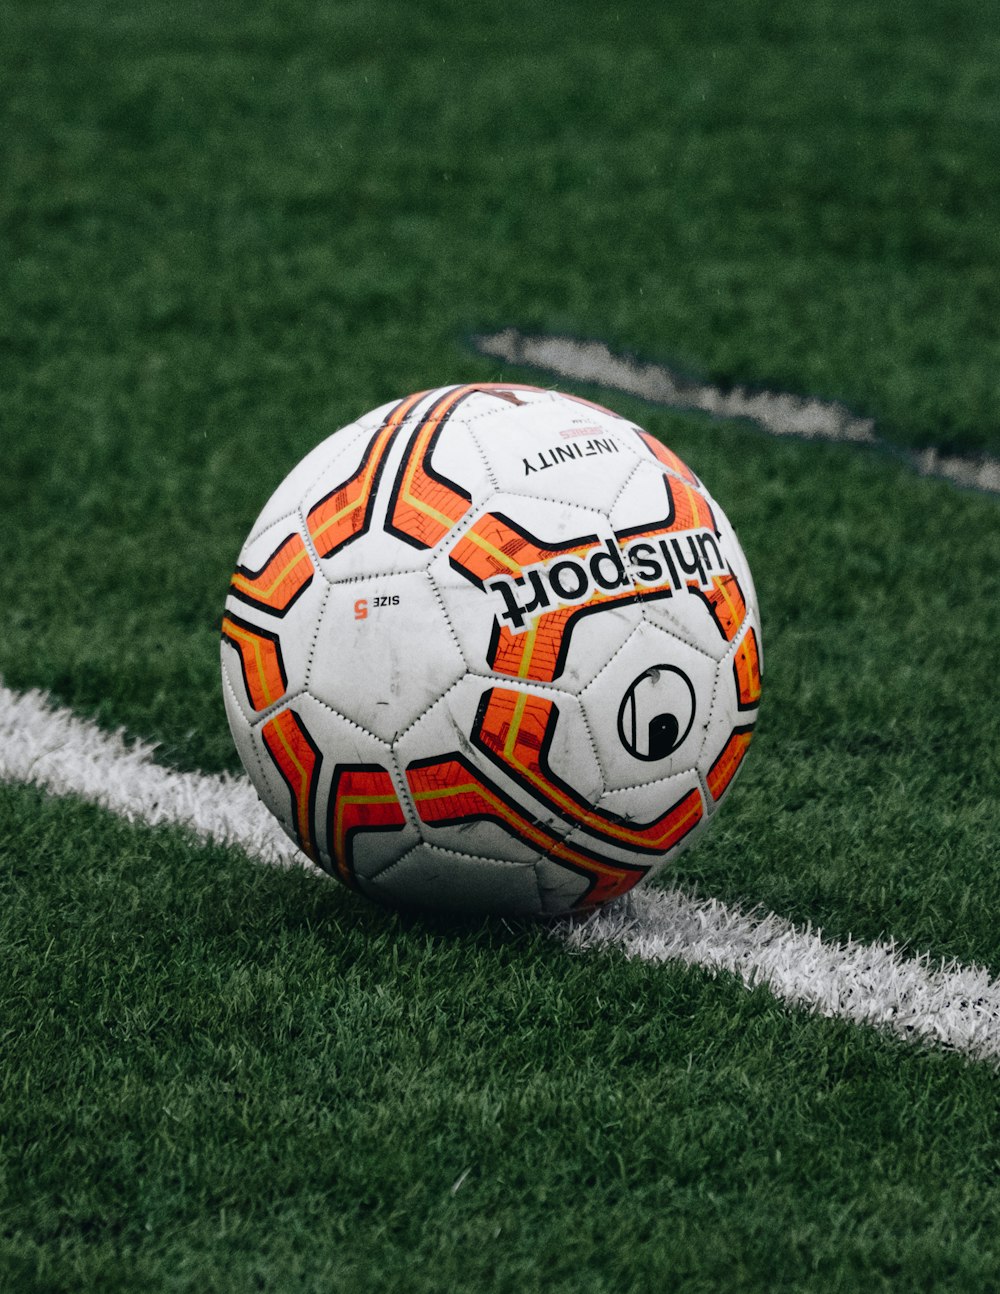 red and orange soccer ball on green grass field